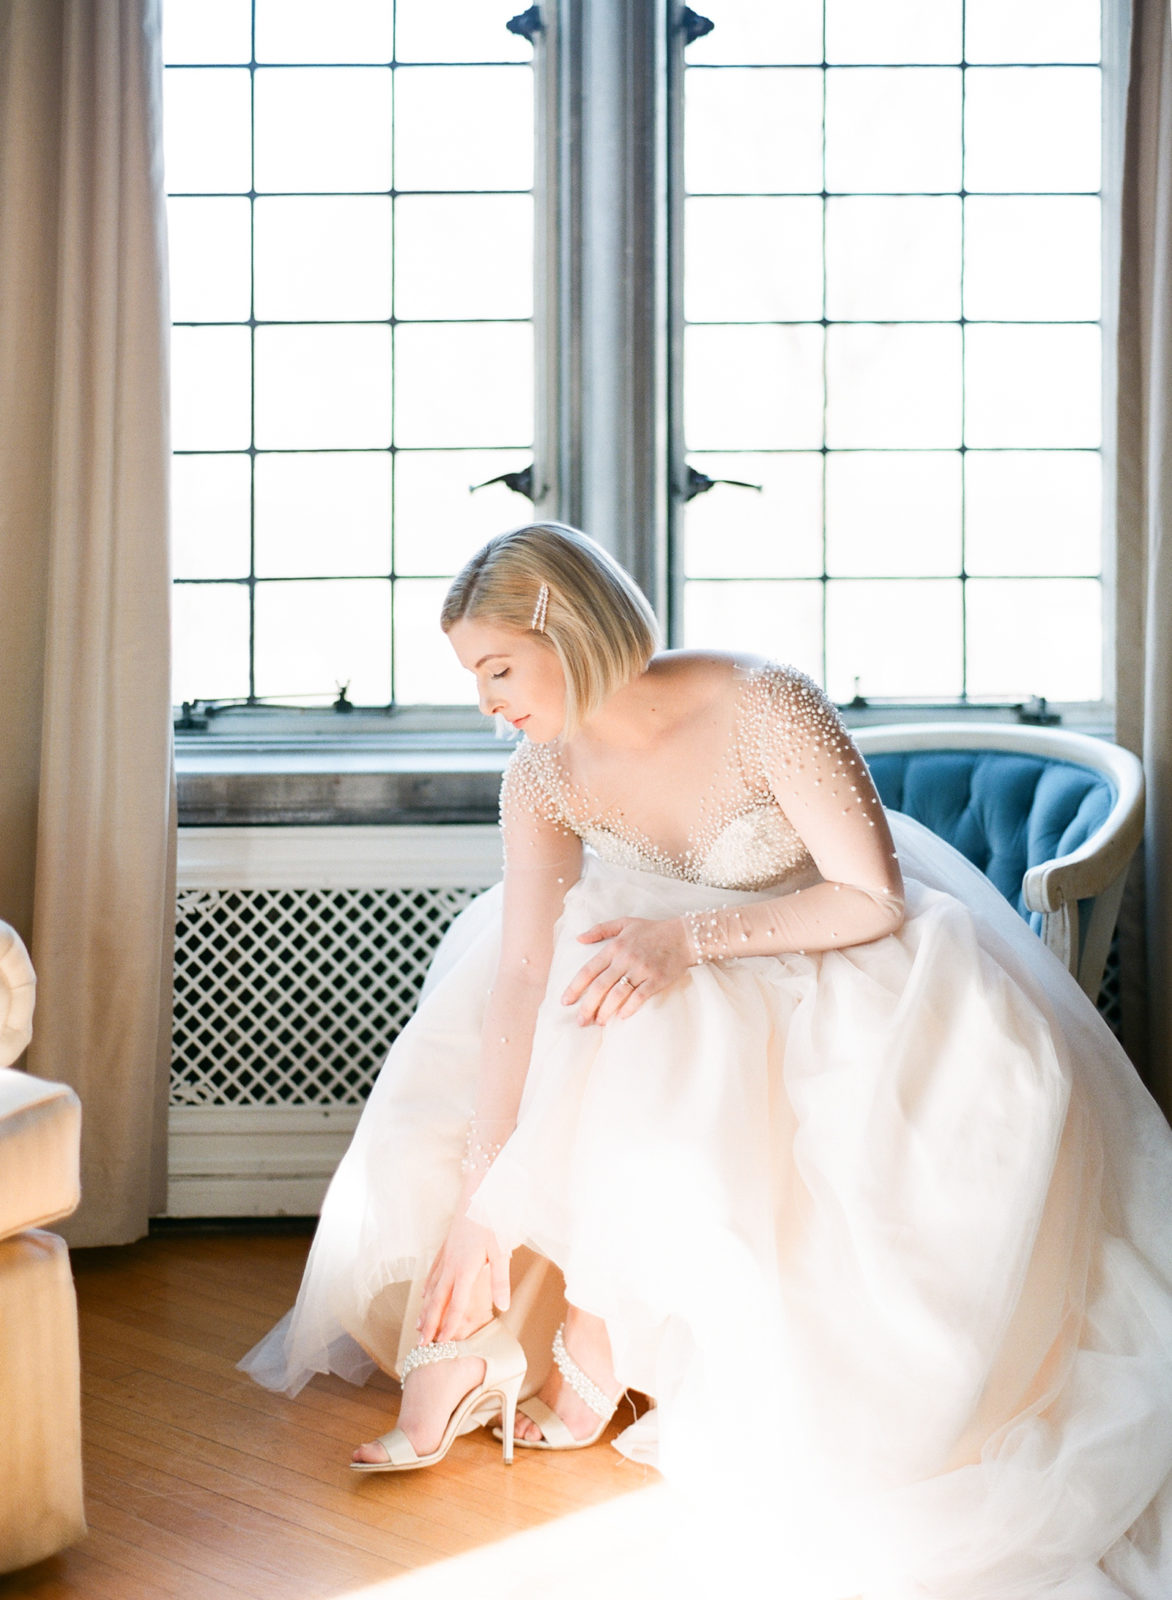 Laurel Hall Wedding Photographer | Estate Wedding Venue | Midwest Film Photographer | Molly Carr Photography | Bride Putting on Shoes